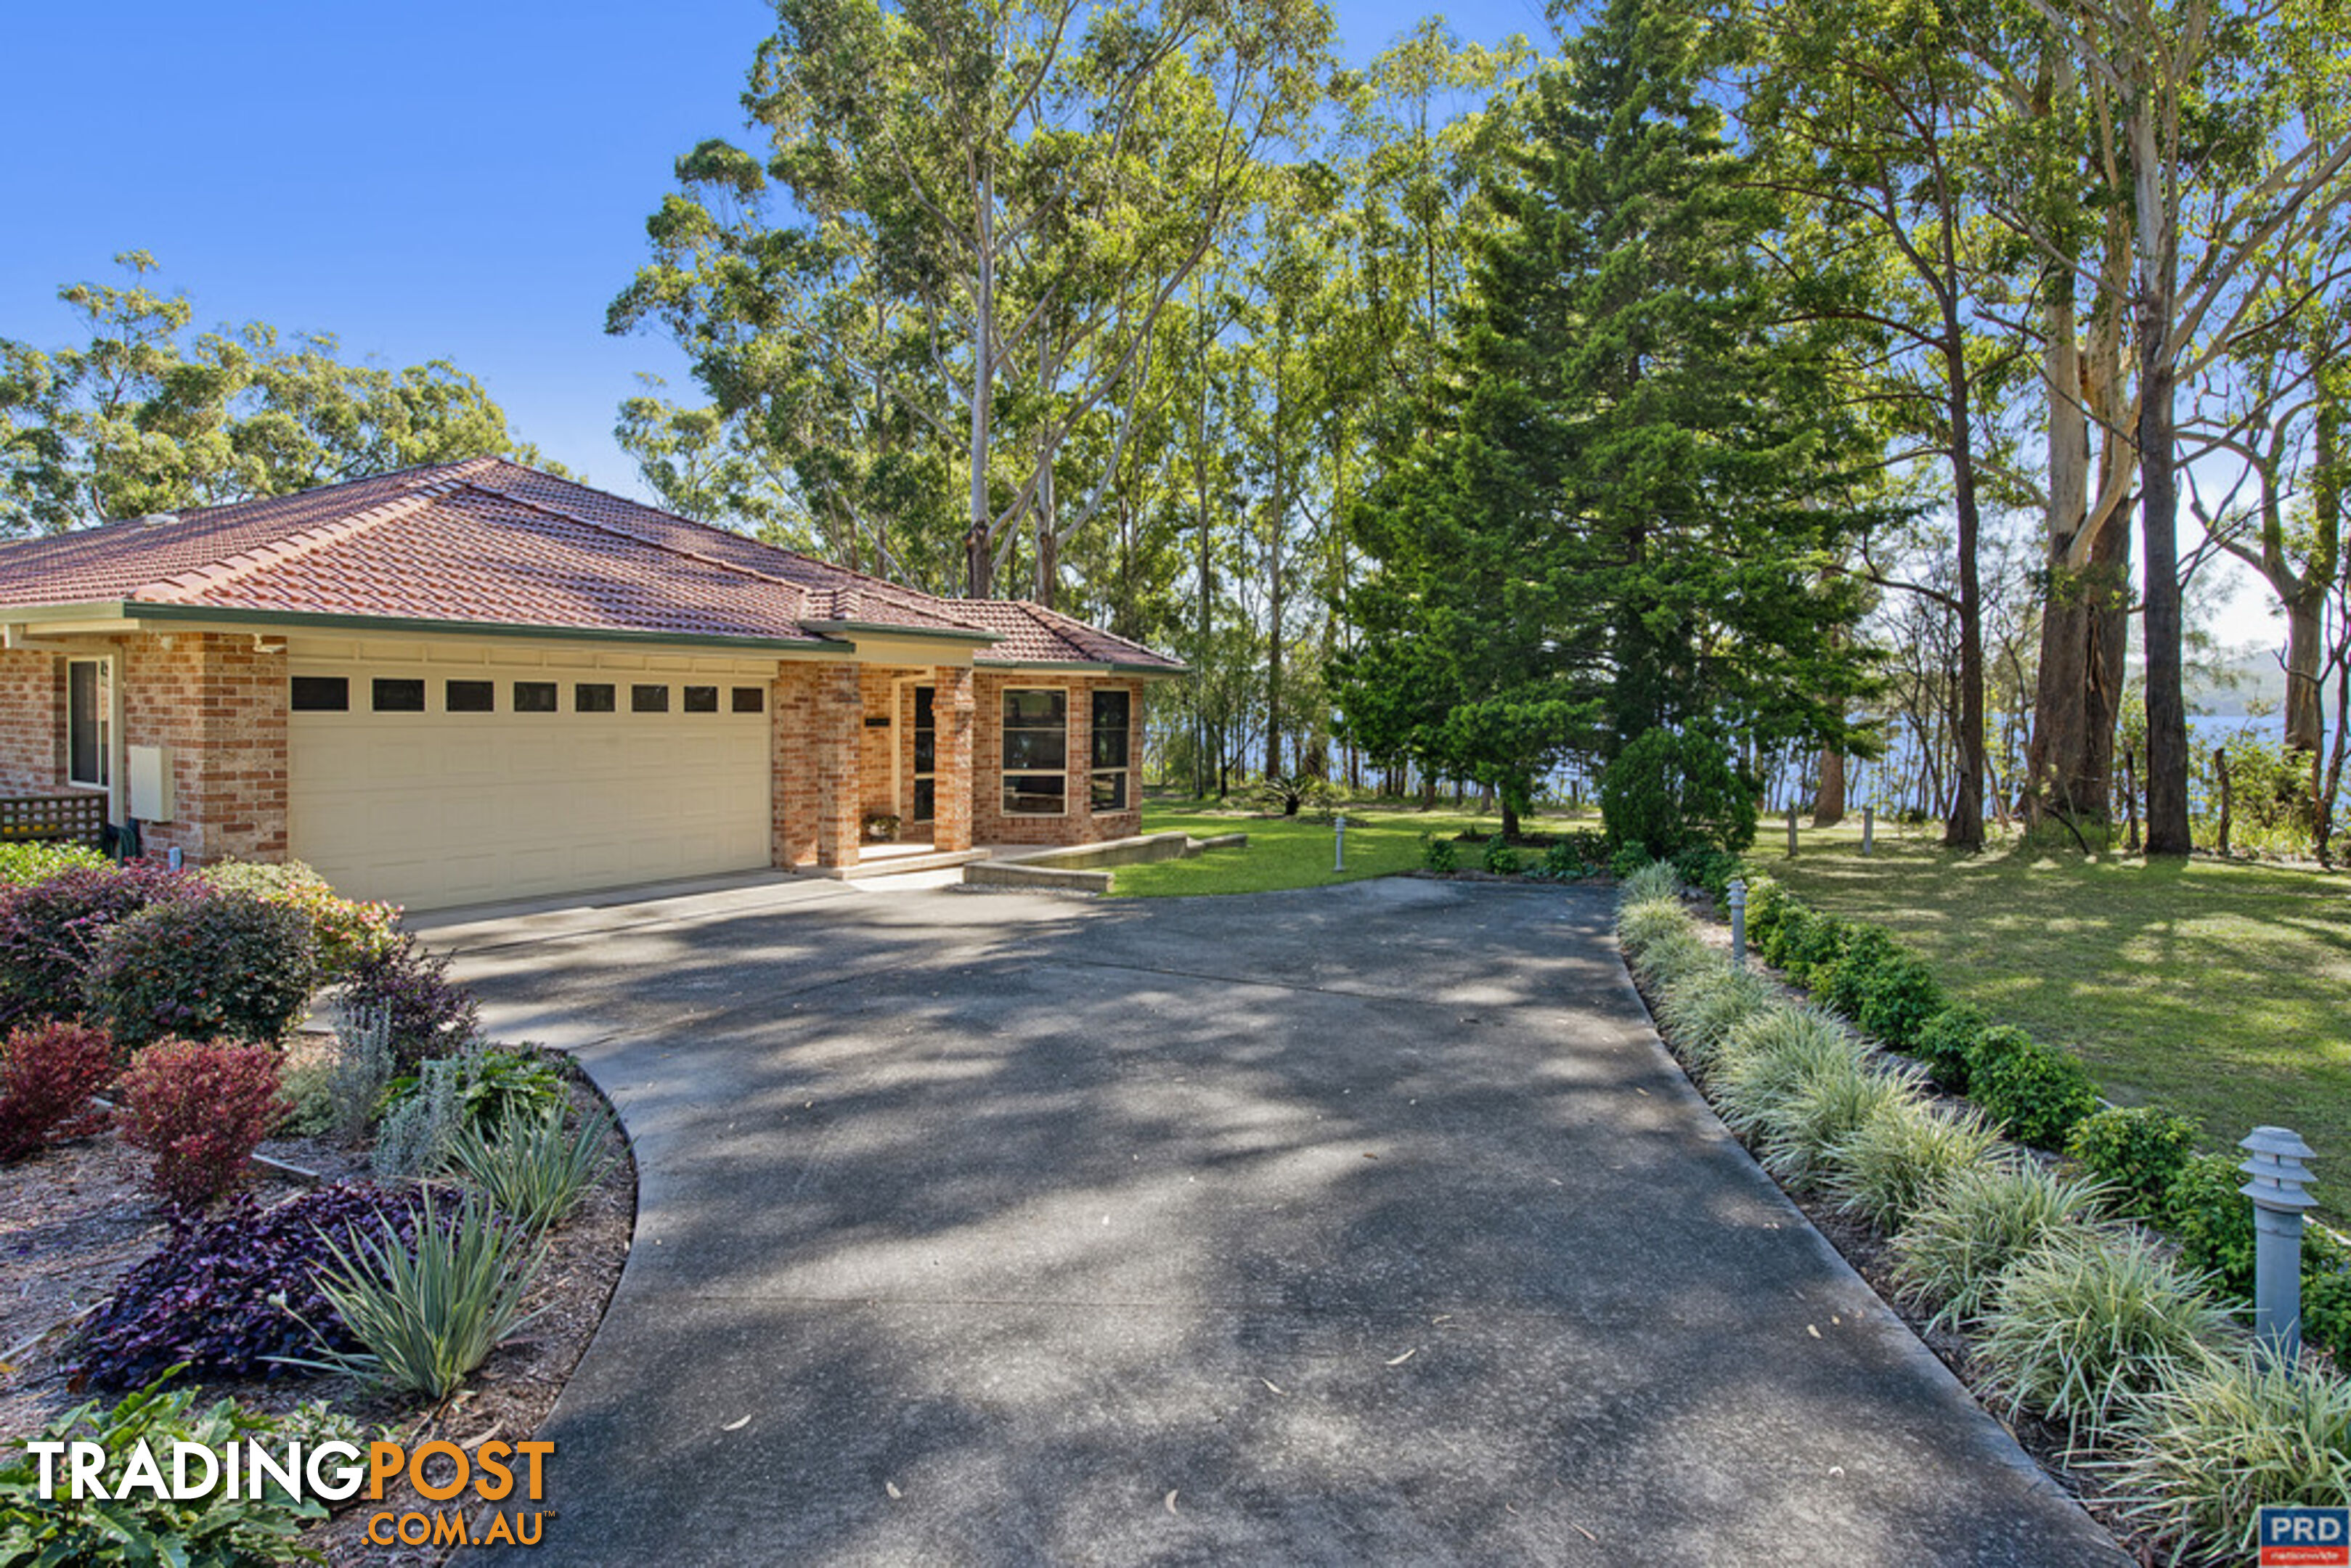 25 Lake View Crescent WEST HAVEN NSW 2443